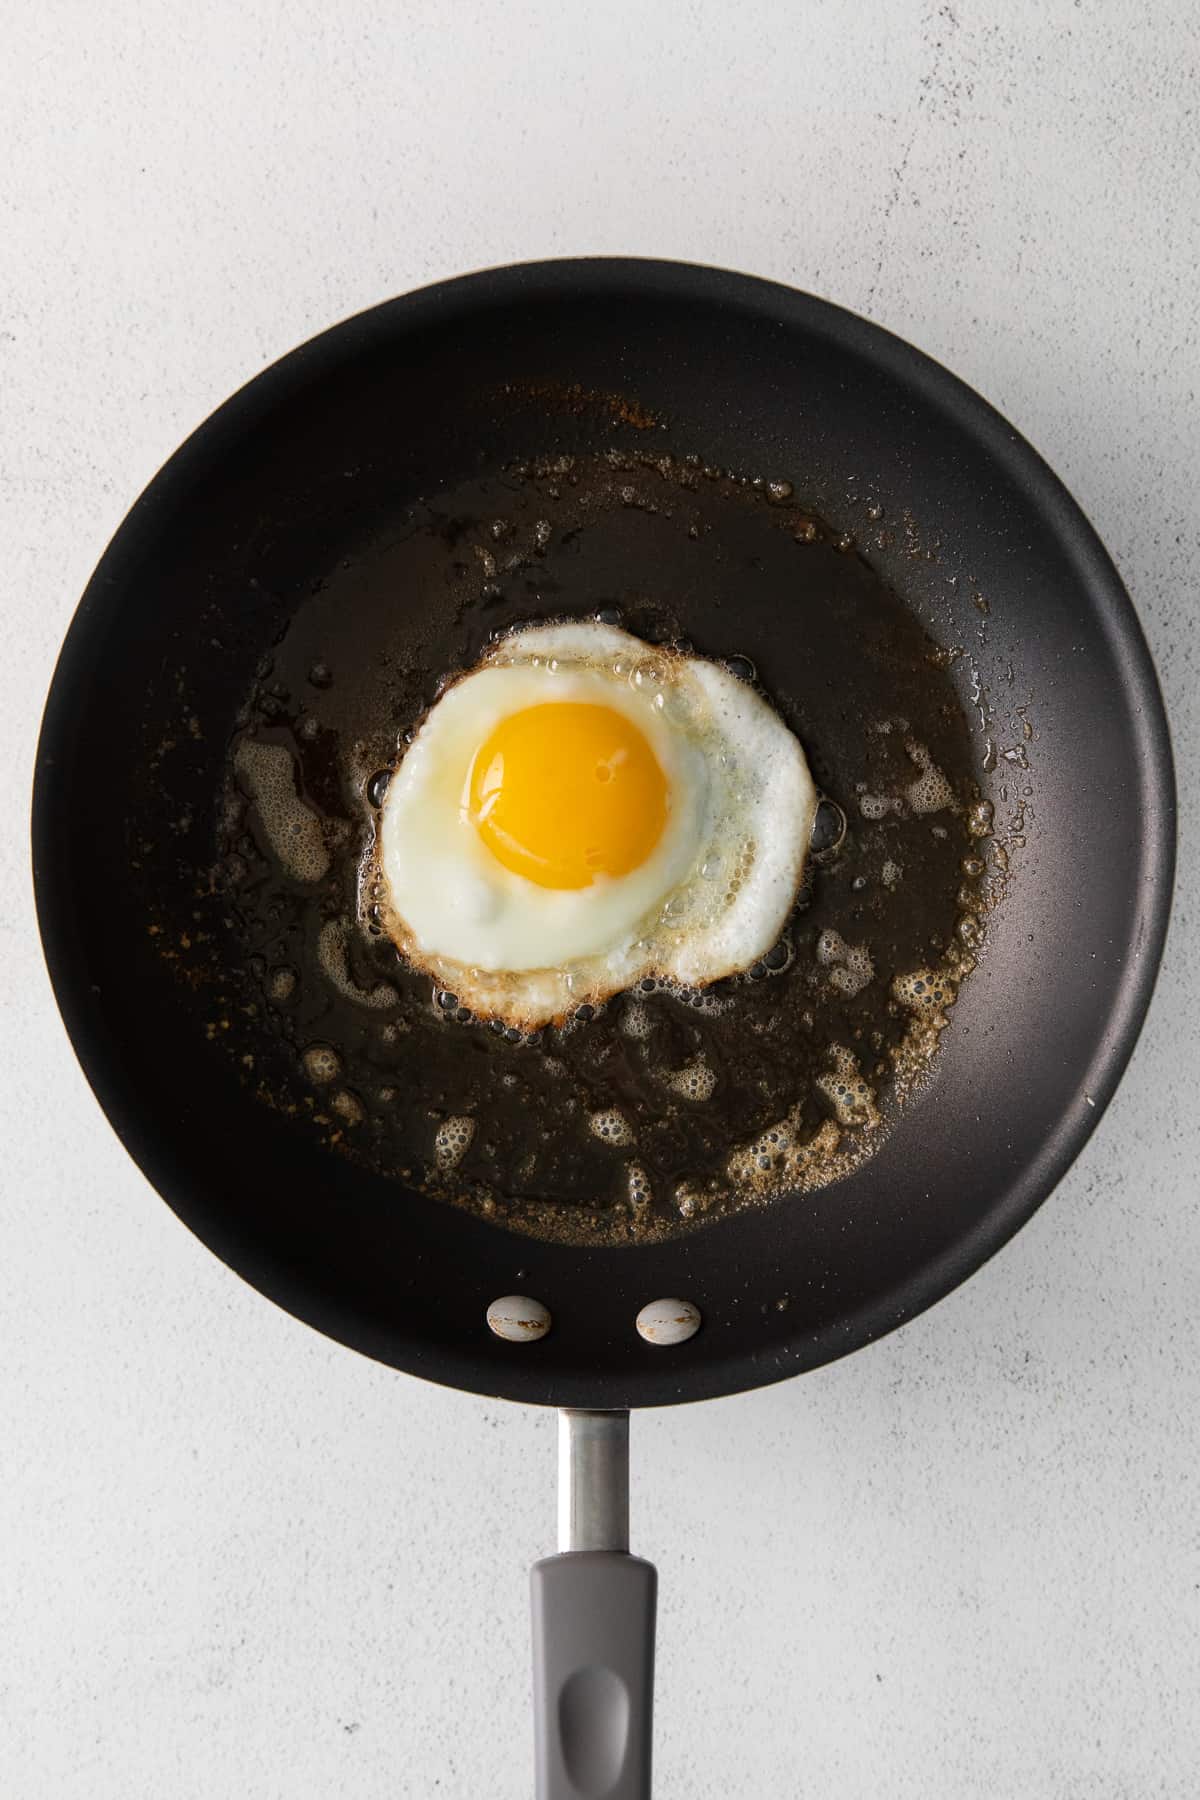 Fried Egg Pouch